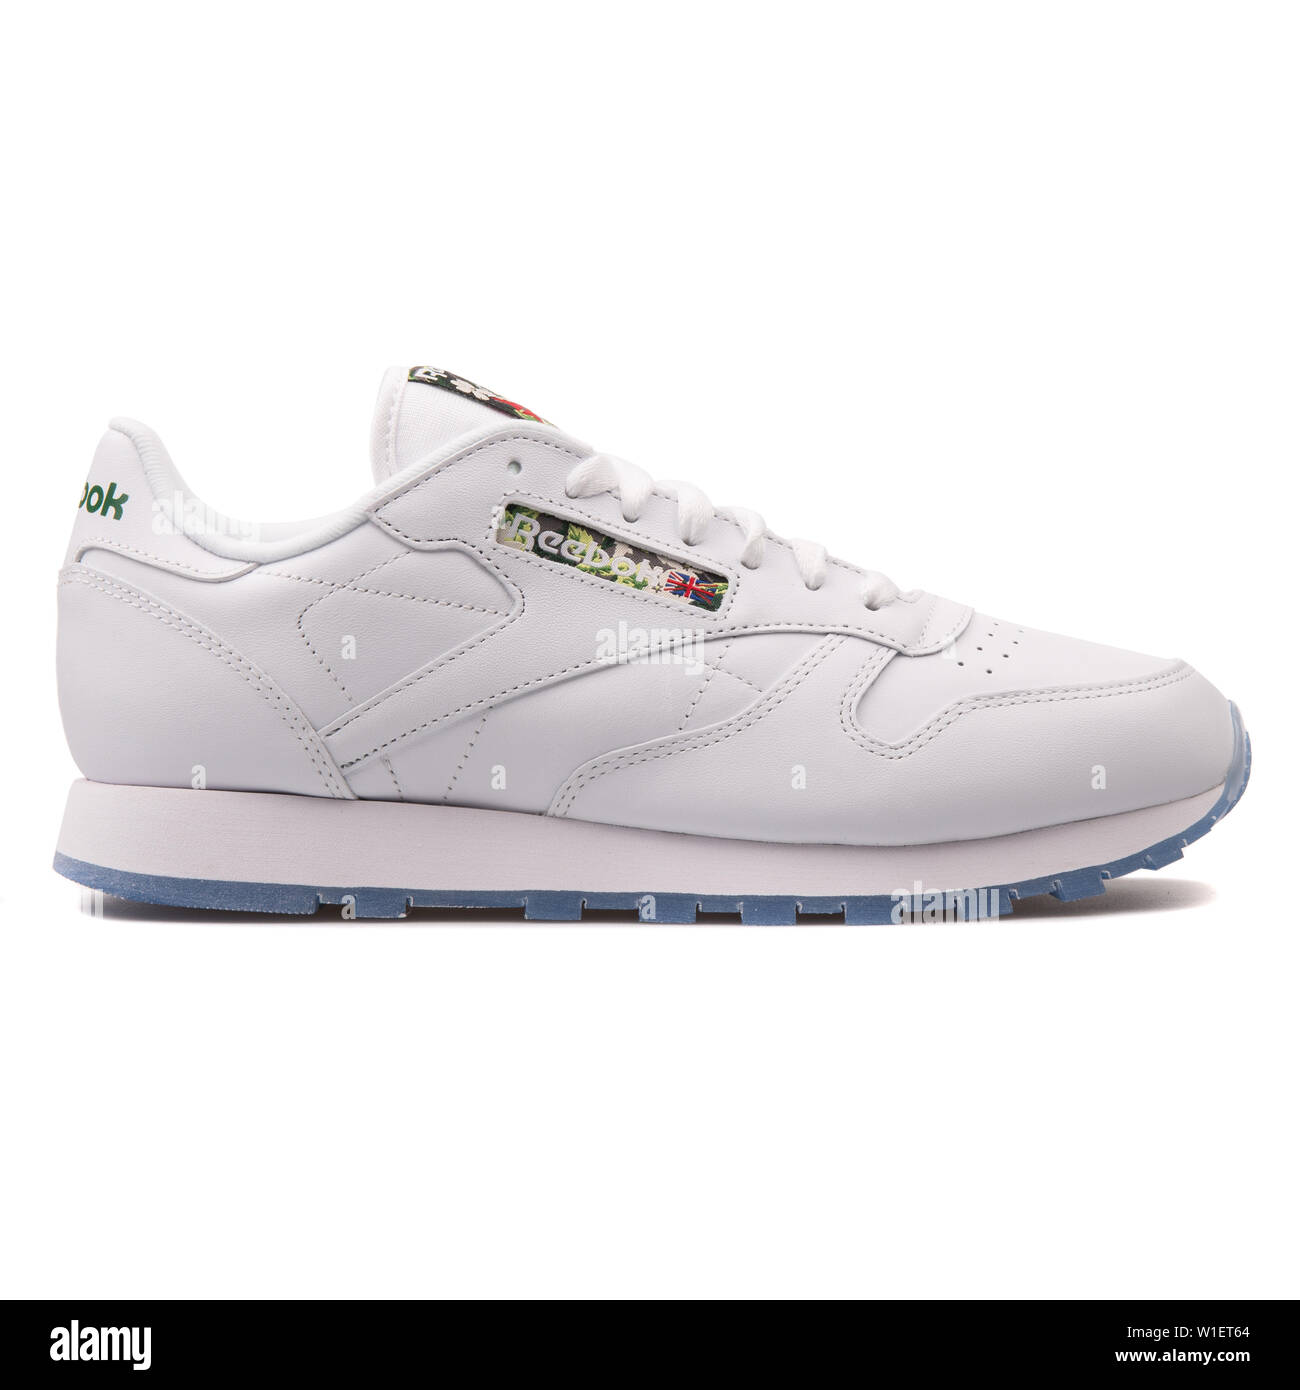 VIENNA, AUSTRIA - AUGUST 10, 2017: Reebok Classic Leather SF white sneaker on background -